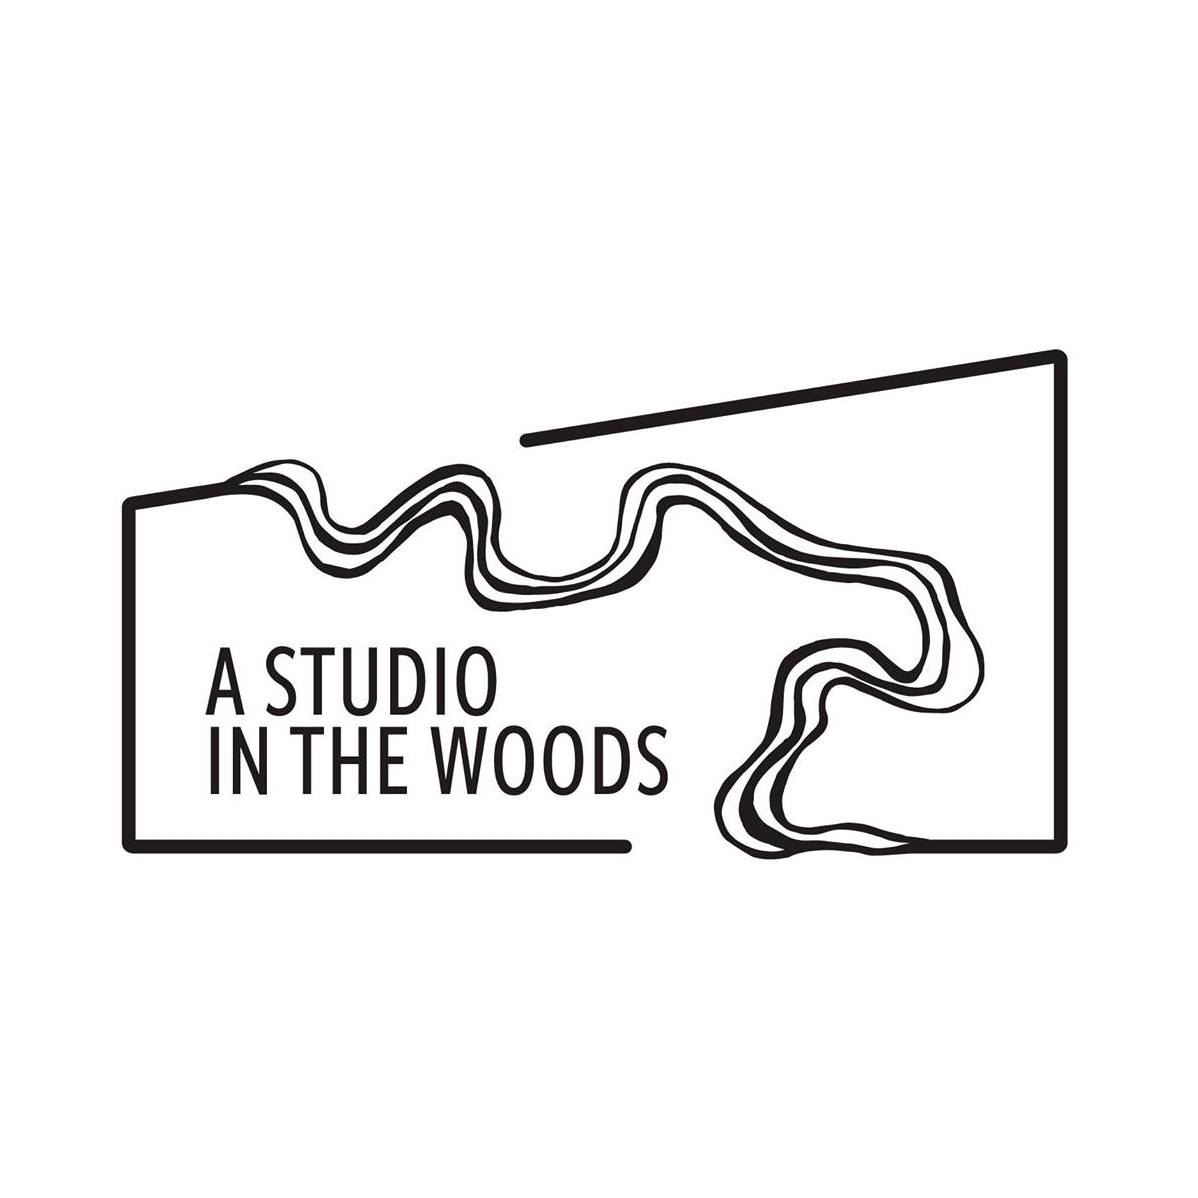 A Studio in the Woods